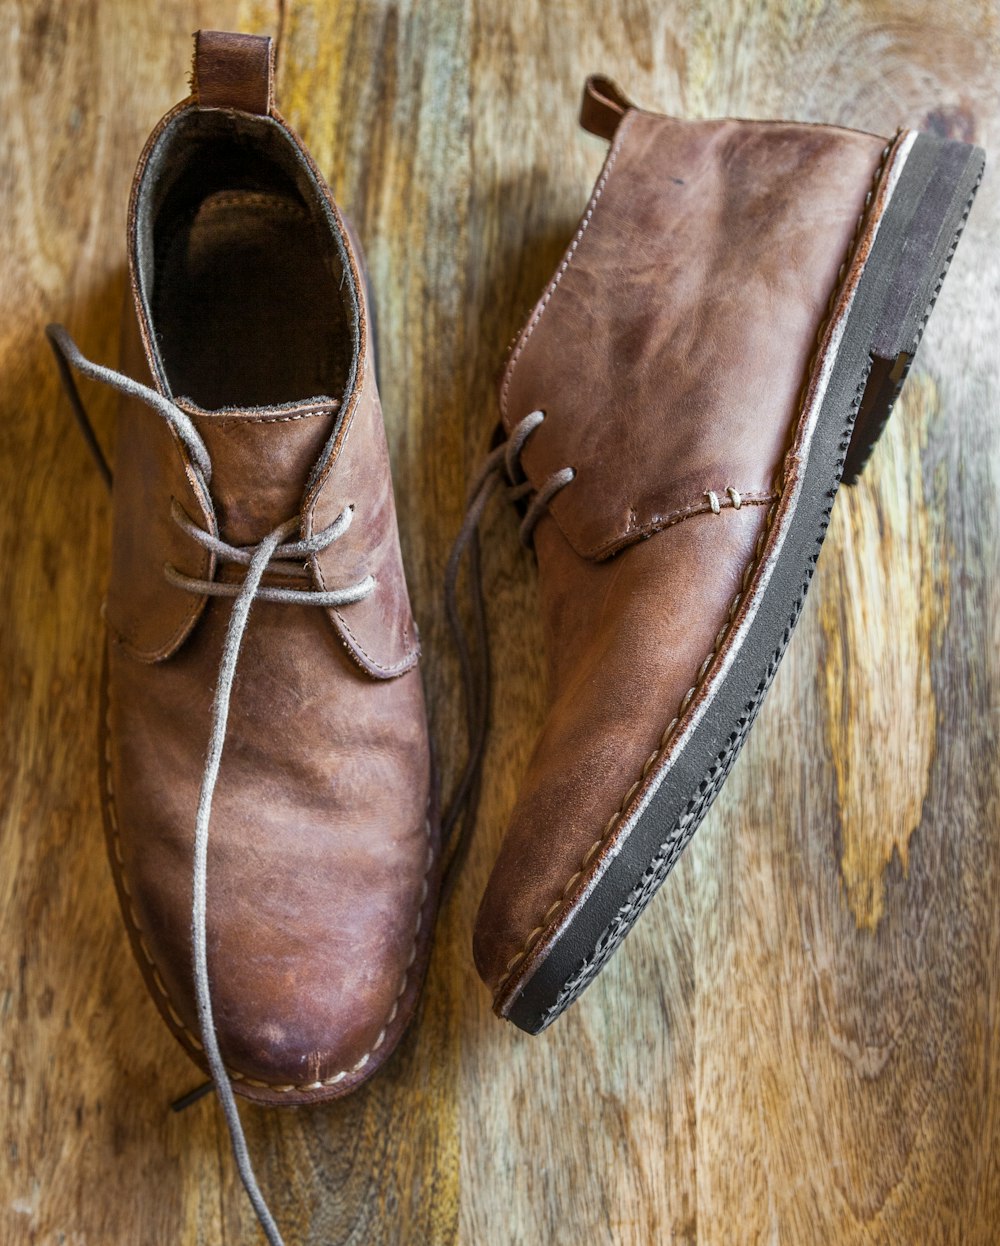 brown leather shoes on brown wooden surface